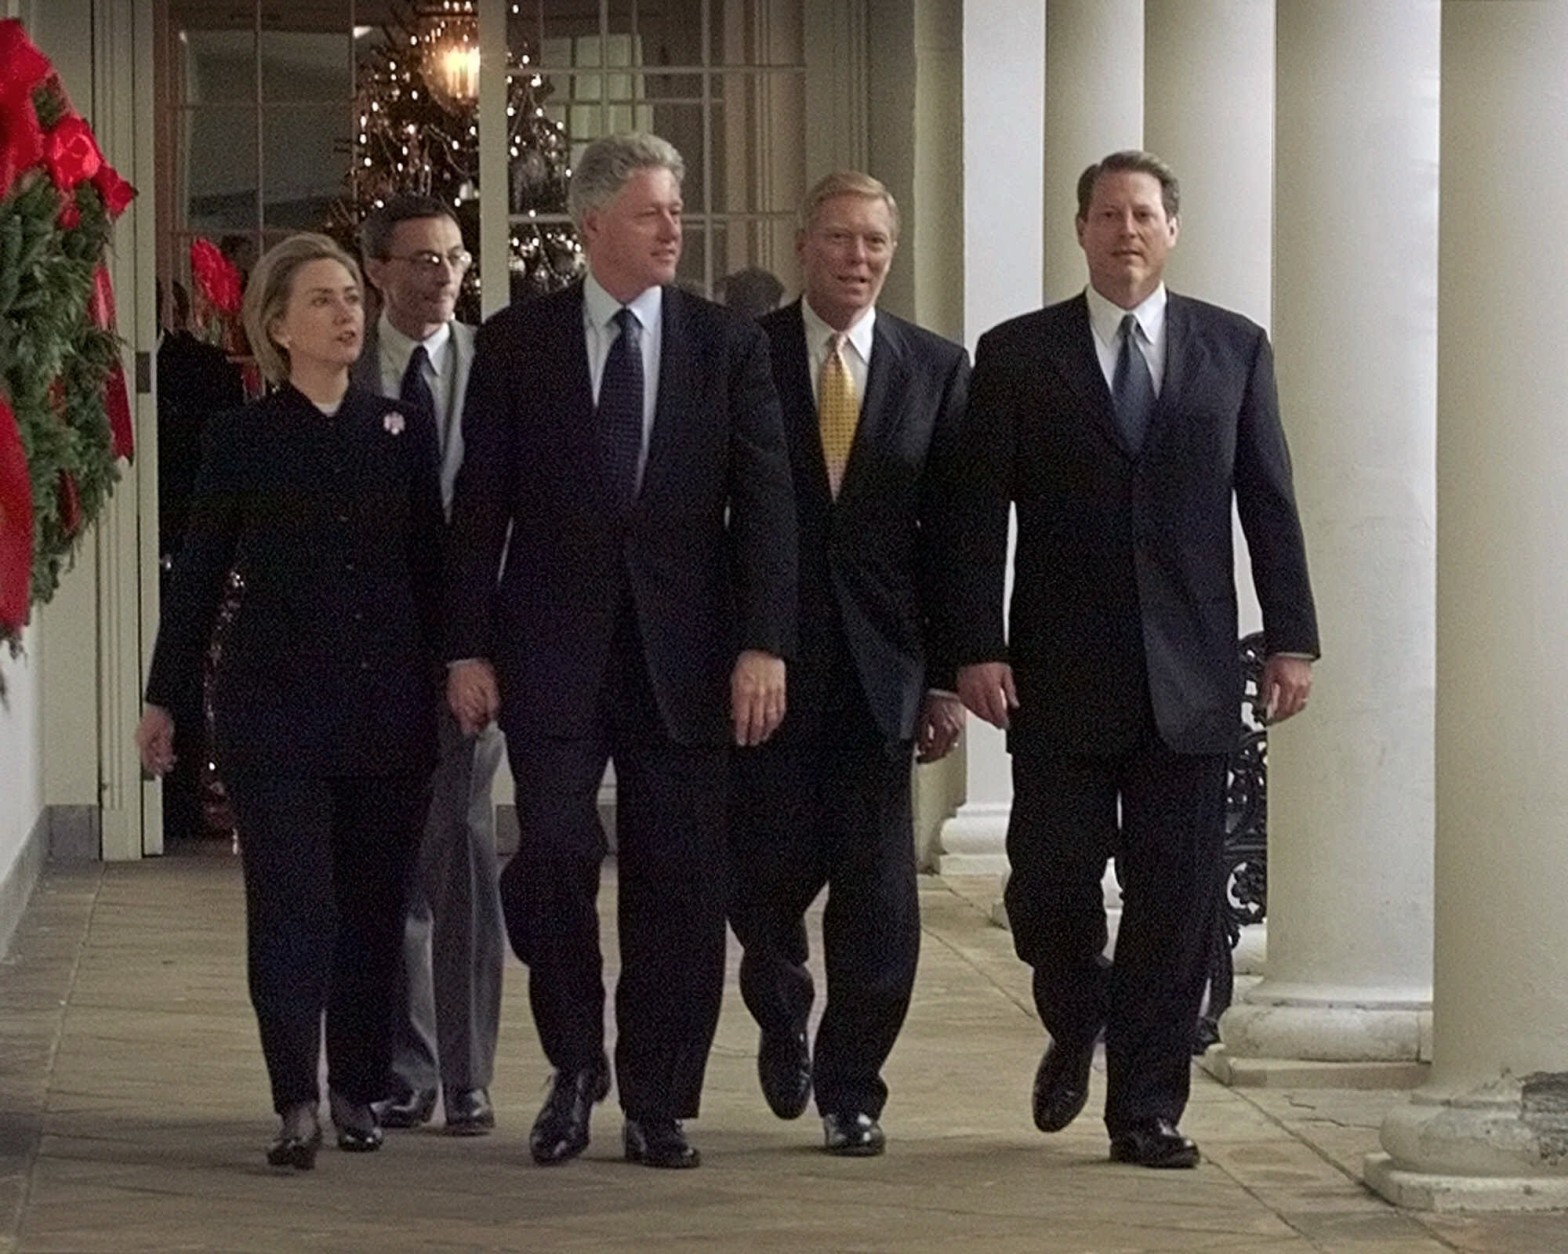 President Bill Clinton holds hands with First Lady Hillary Rodham Clinton while on the way to a rally with House Democrats following a historic vote in the House of Representatives to impeach the President. Walking with the first couple is White House Chief of Staff John Podesta, House Minority Leader Richard Gephardt and Vice President Al Gore. (AP Photo/Greg Gibson)